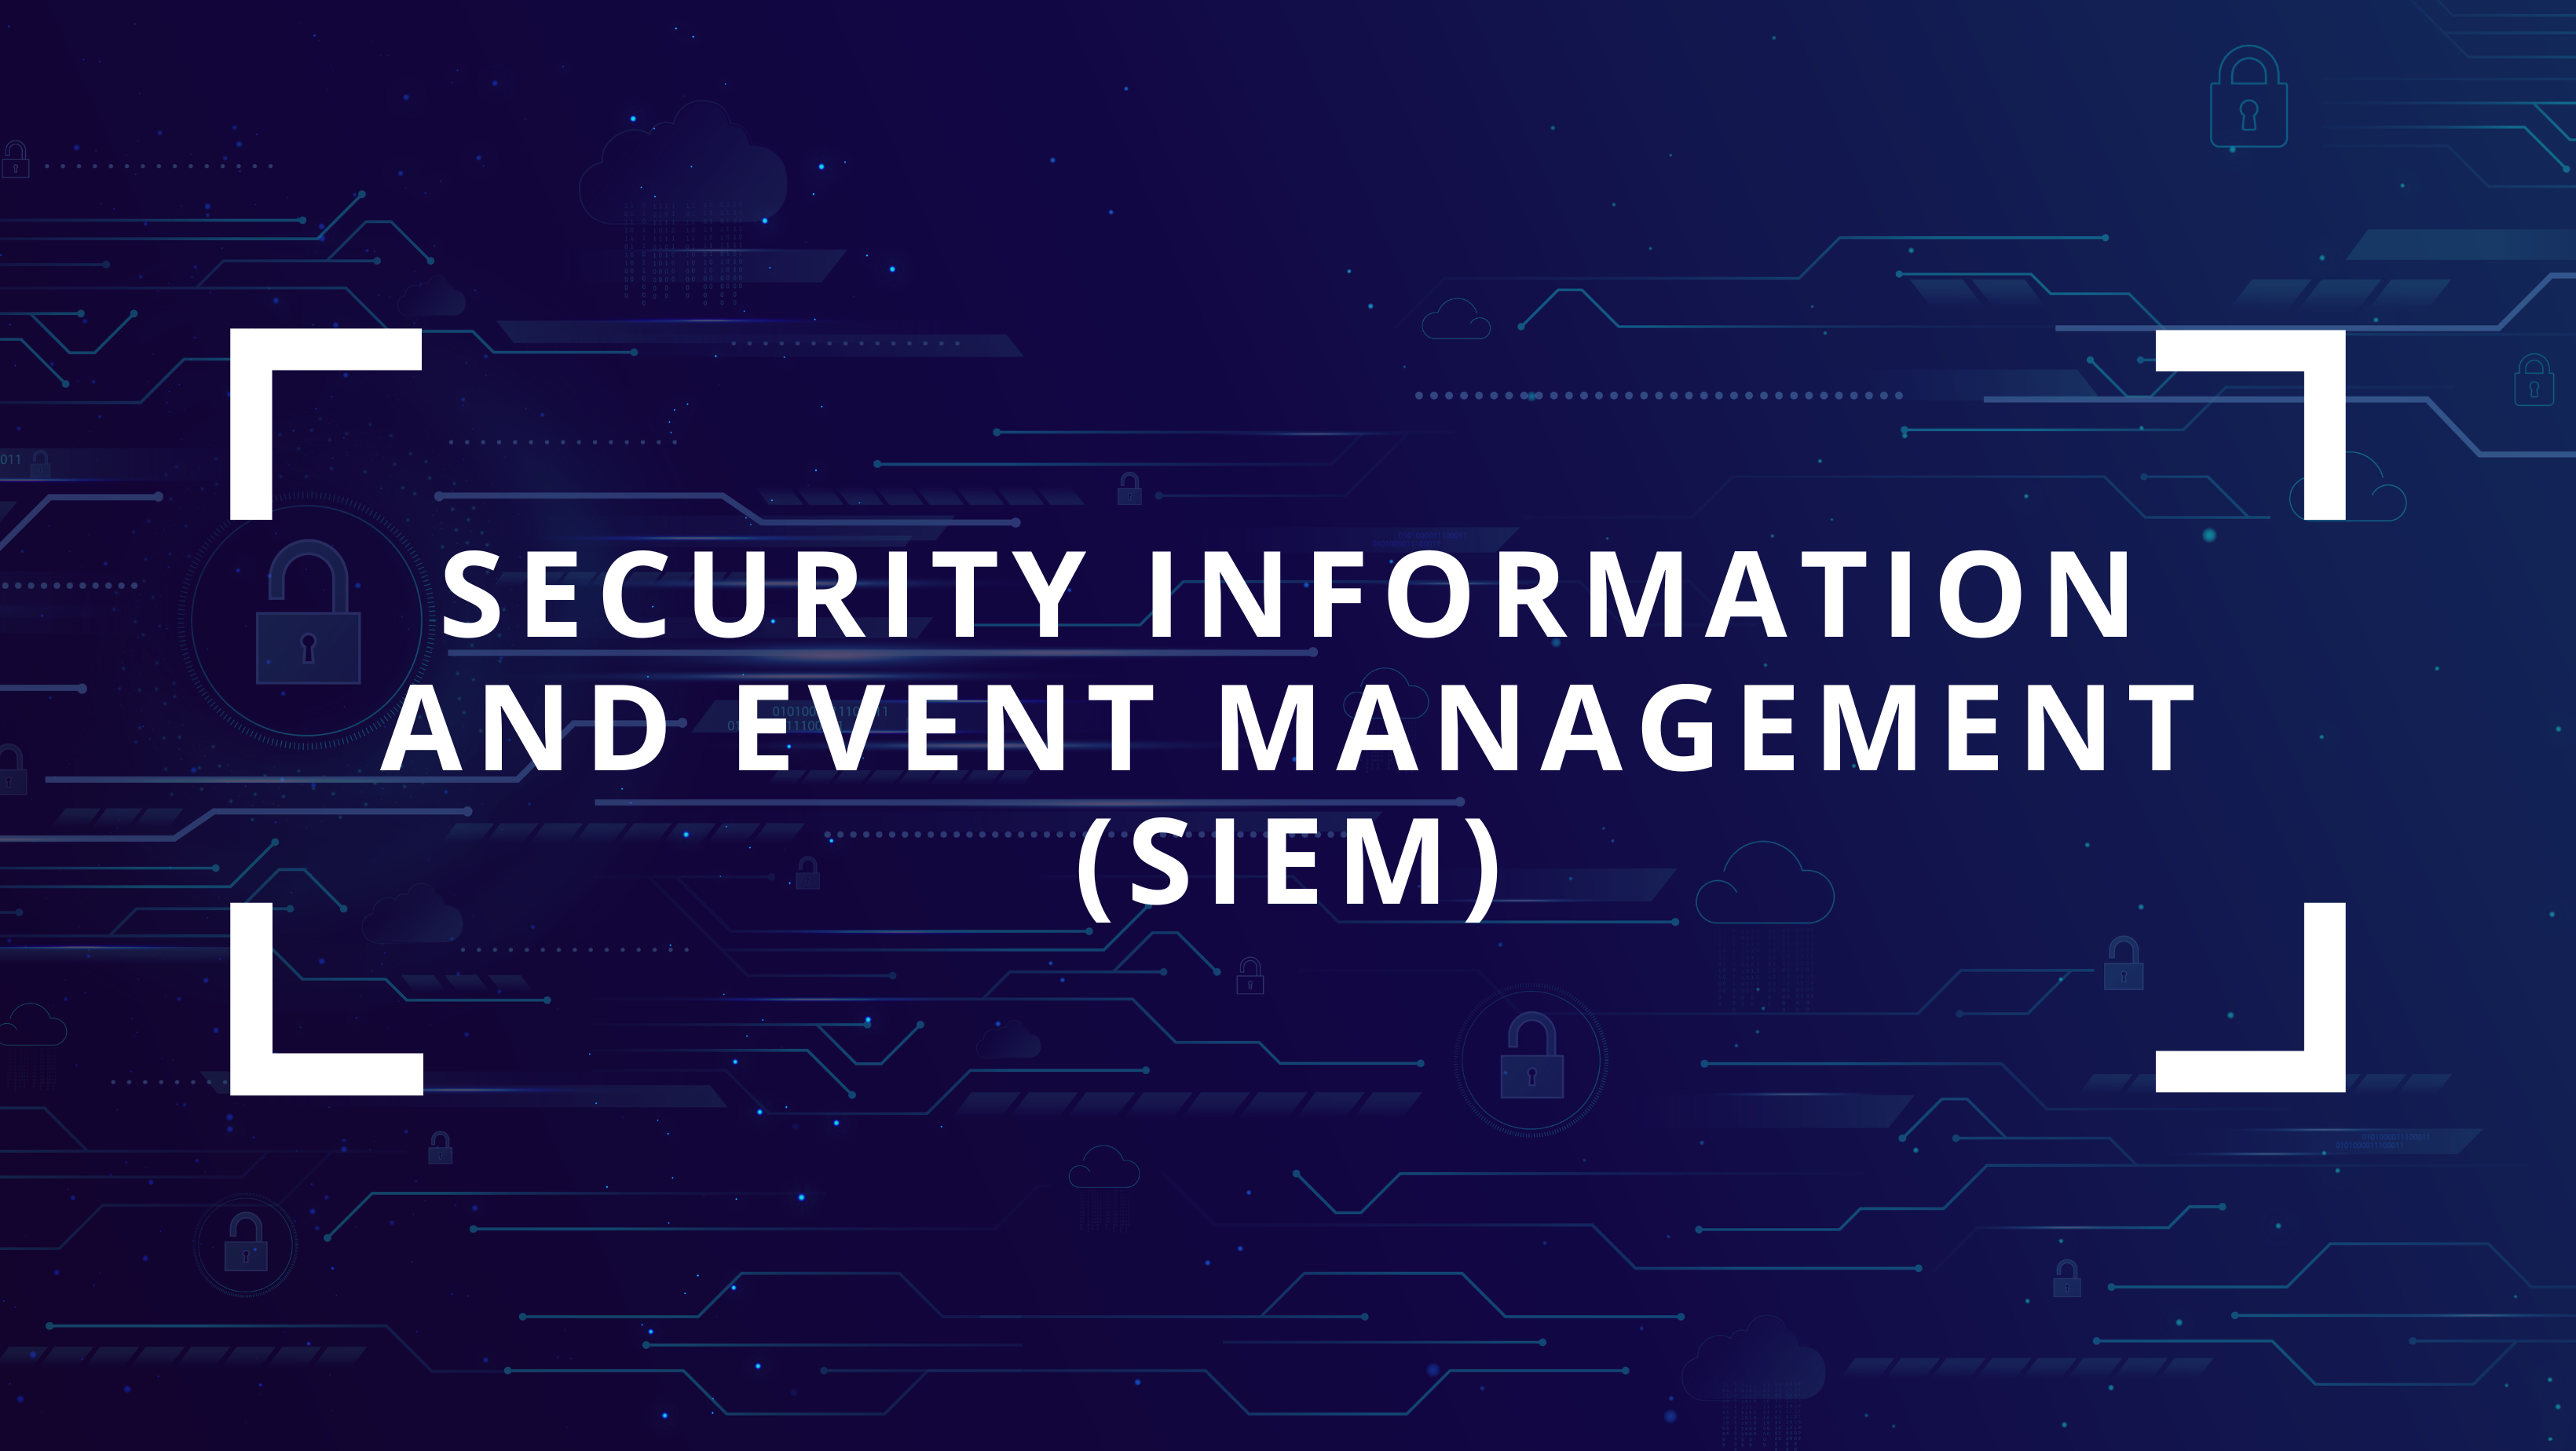 A Brief Introduction to Security Information and Event Management (SIEM)